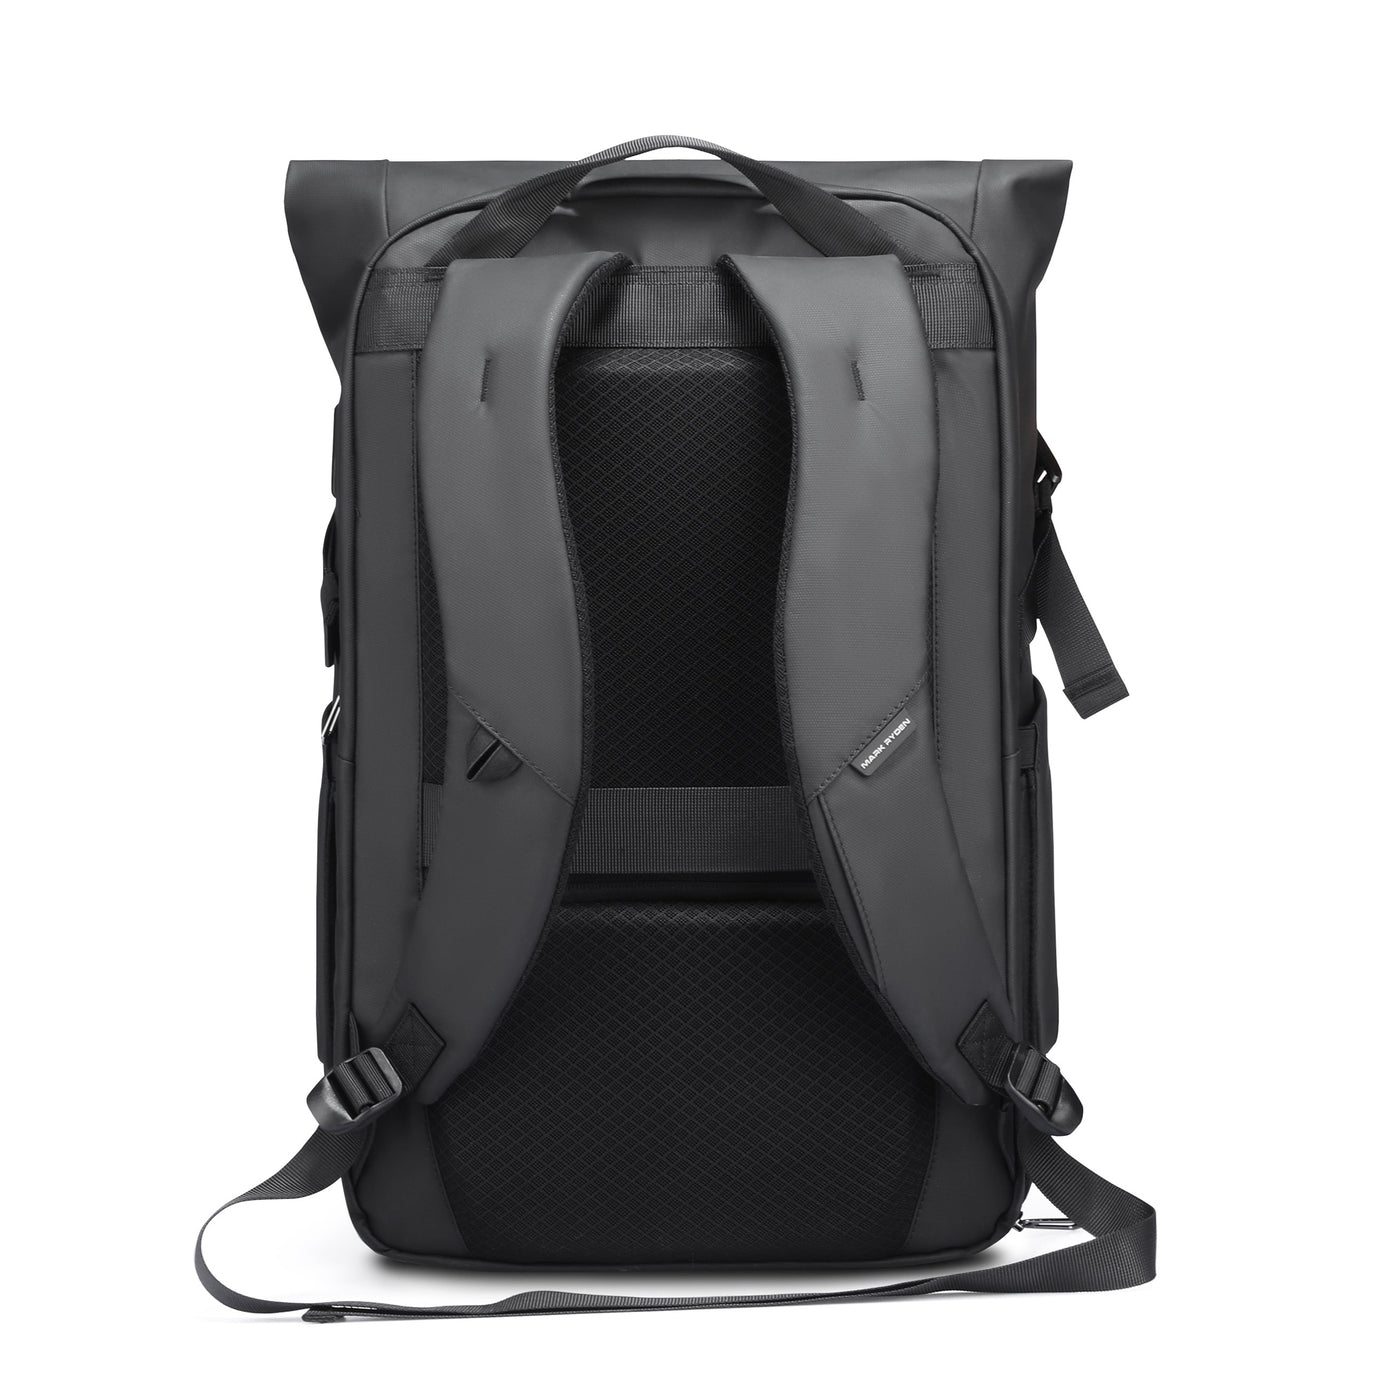 Mark Ryden Unit daily commuter laptop backpack with usb charging